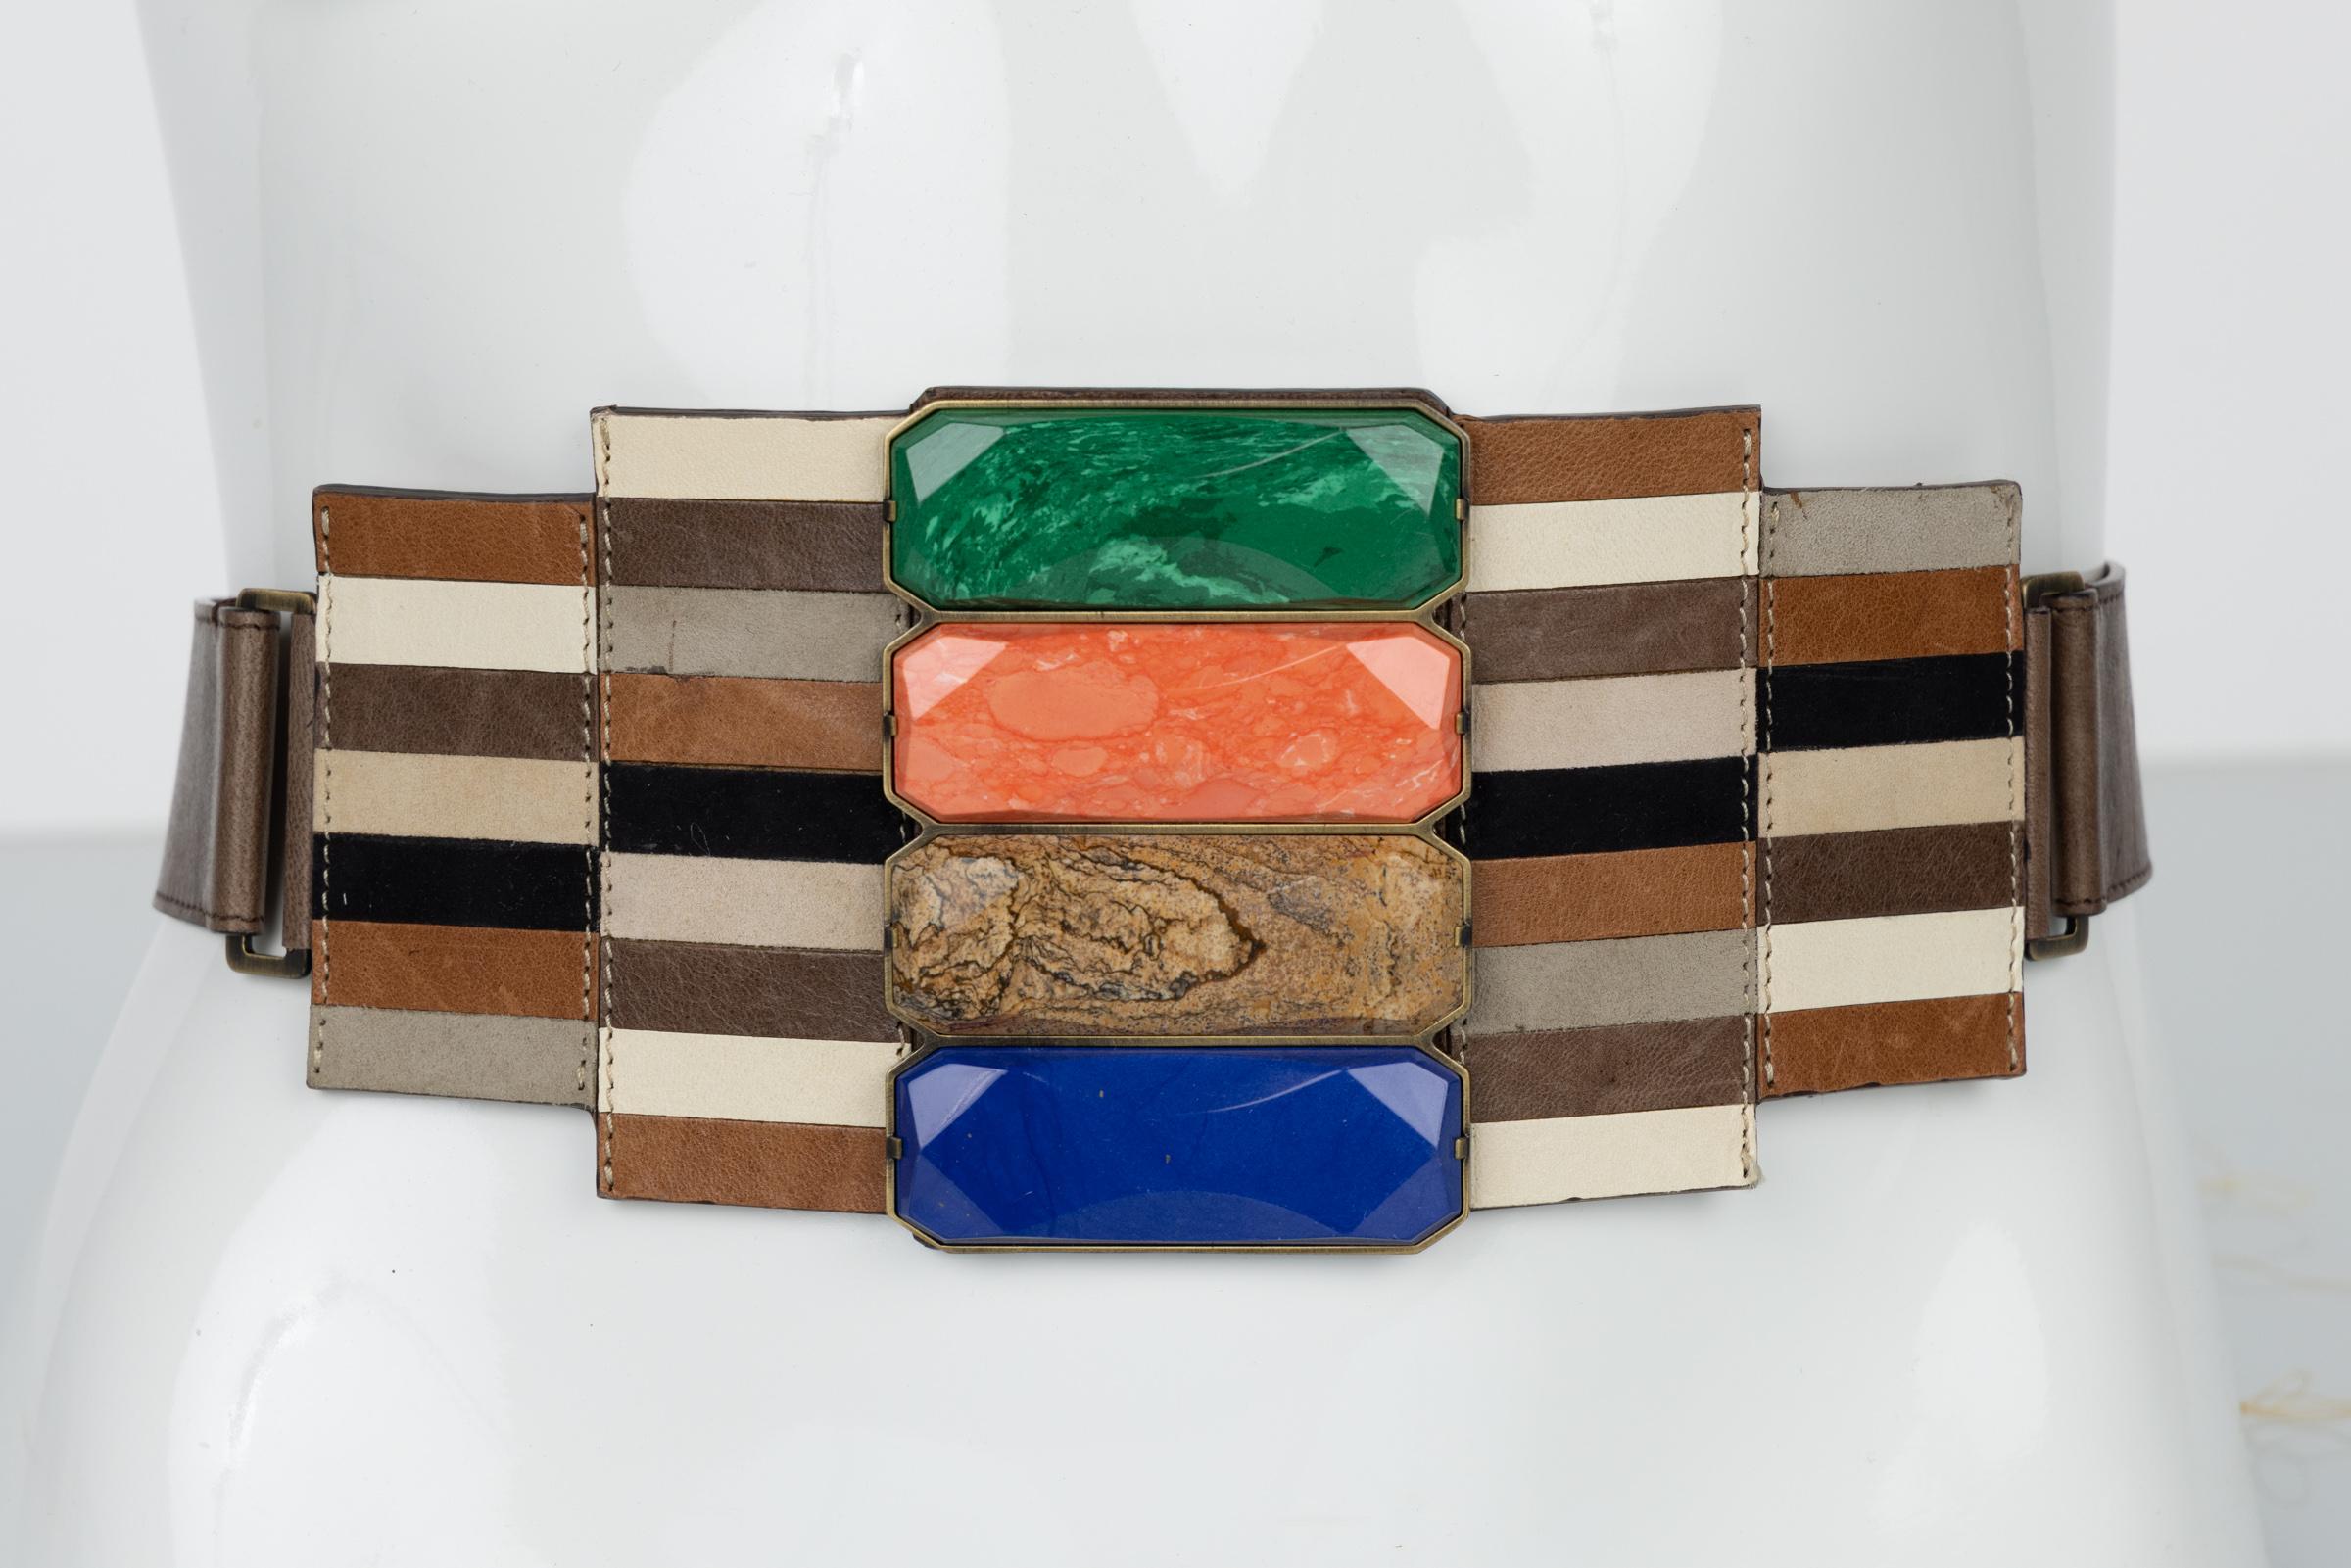 Fendi spring 2008 Memphis style belt. Done in mosaic pieced leather with four large faceted cabochons in lapis, jasper, coral, and malachite.
This belt is from look #16 on the runway.
Closes at the back with a brass plaque hook.
New with tags